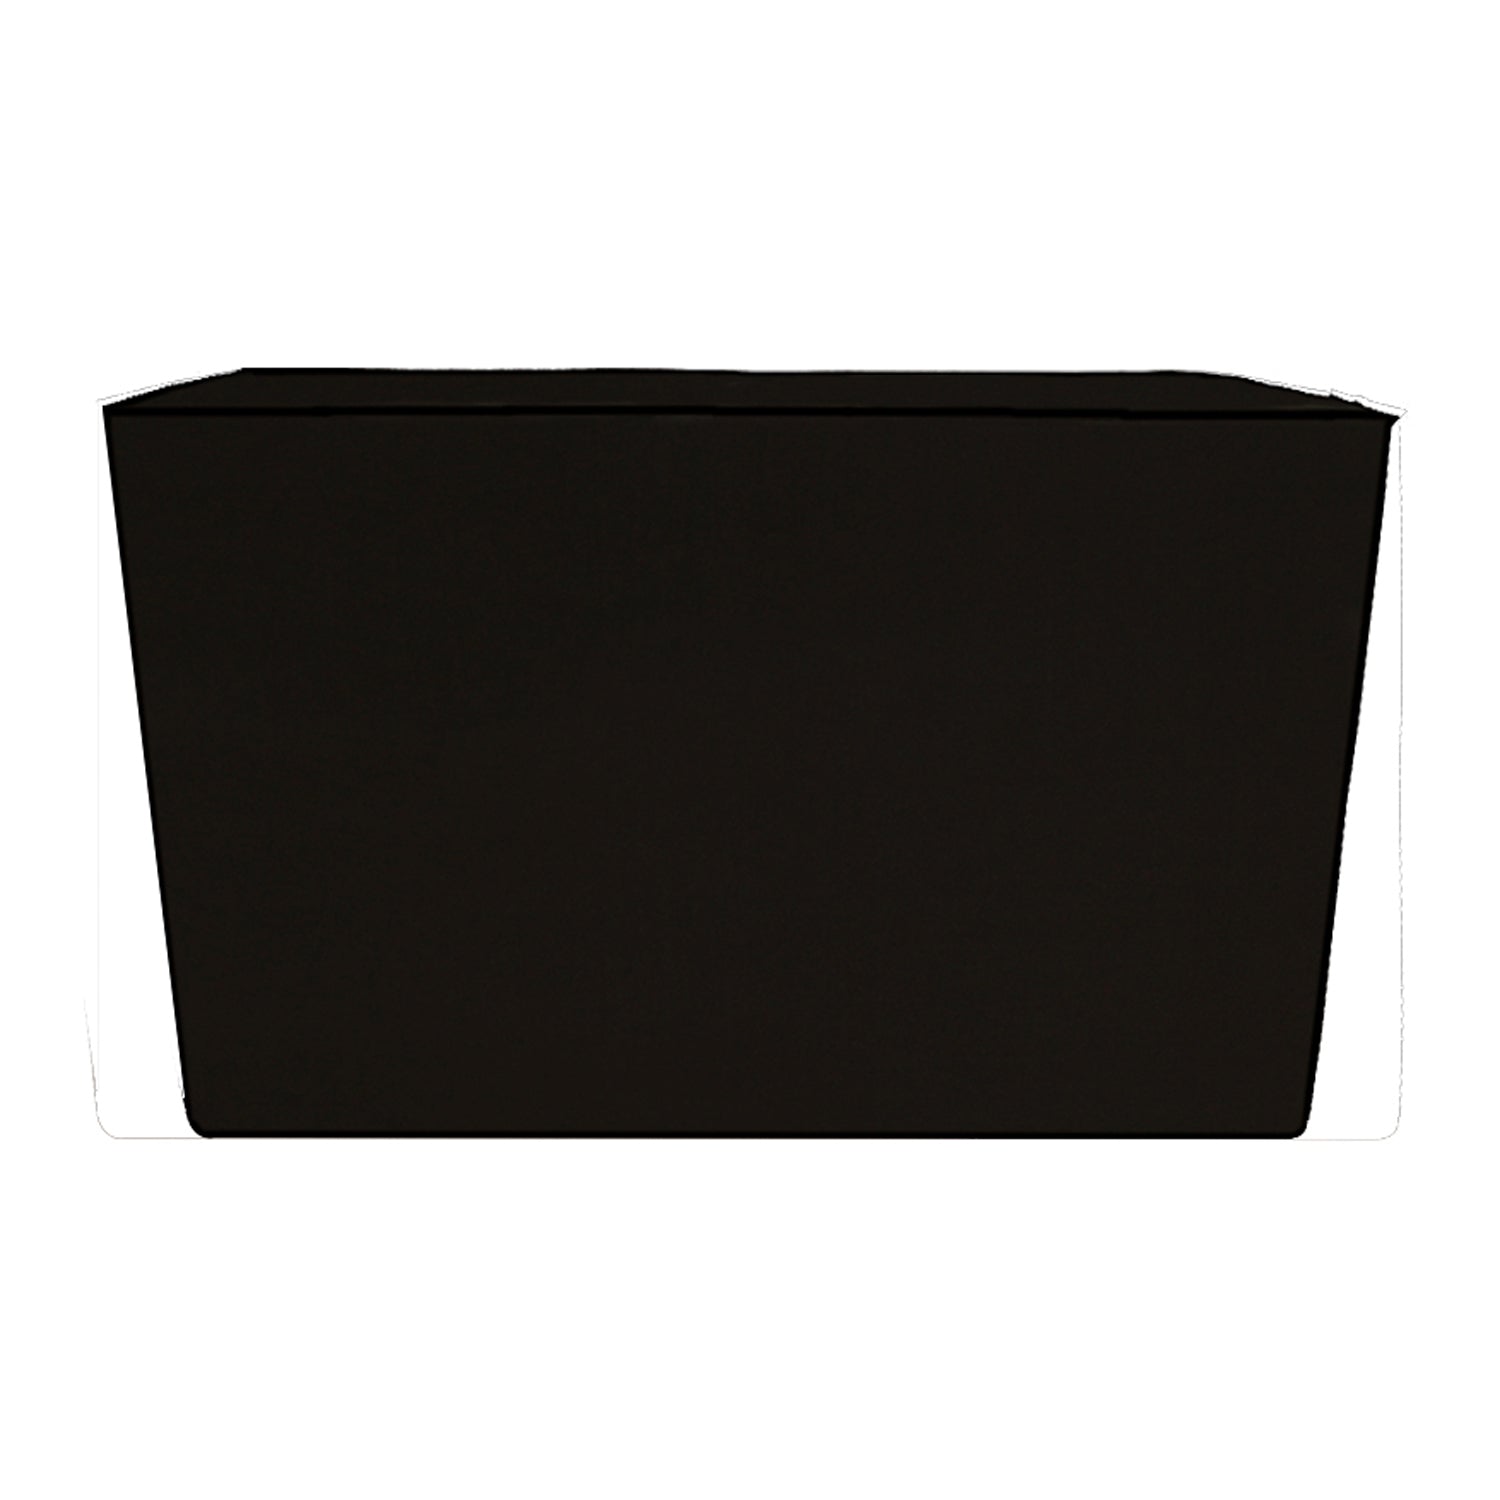 Waterproof and Dustproof Split Outdoor AC Cover, Coffee - Dream Care Furnishings Private Limited